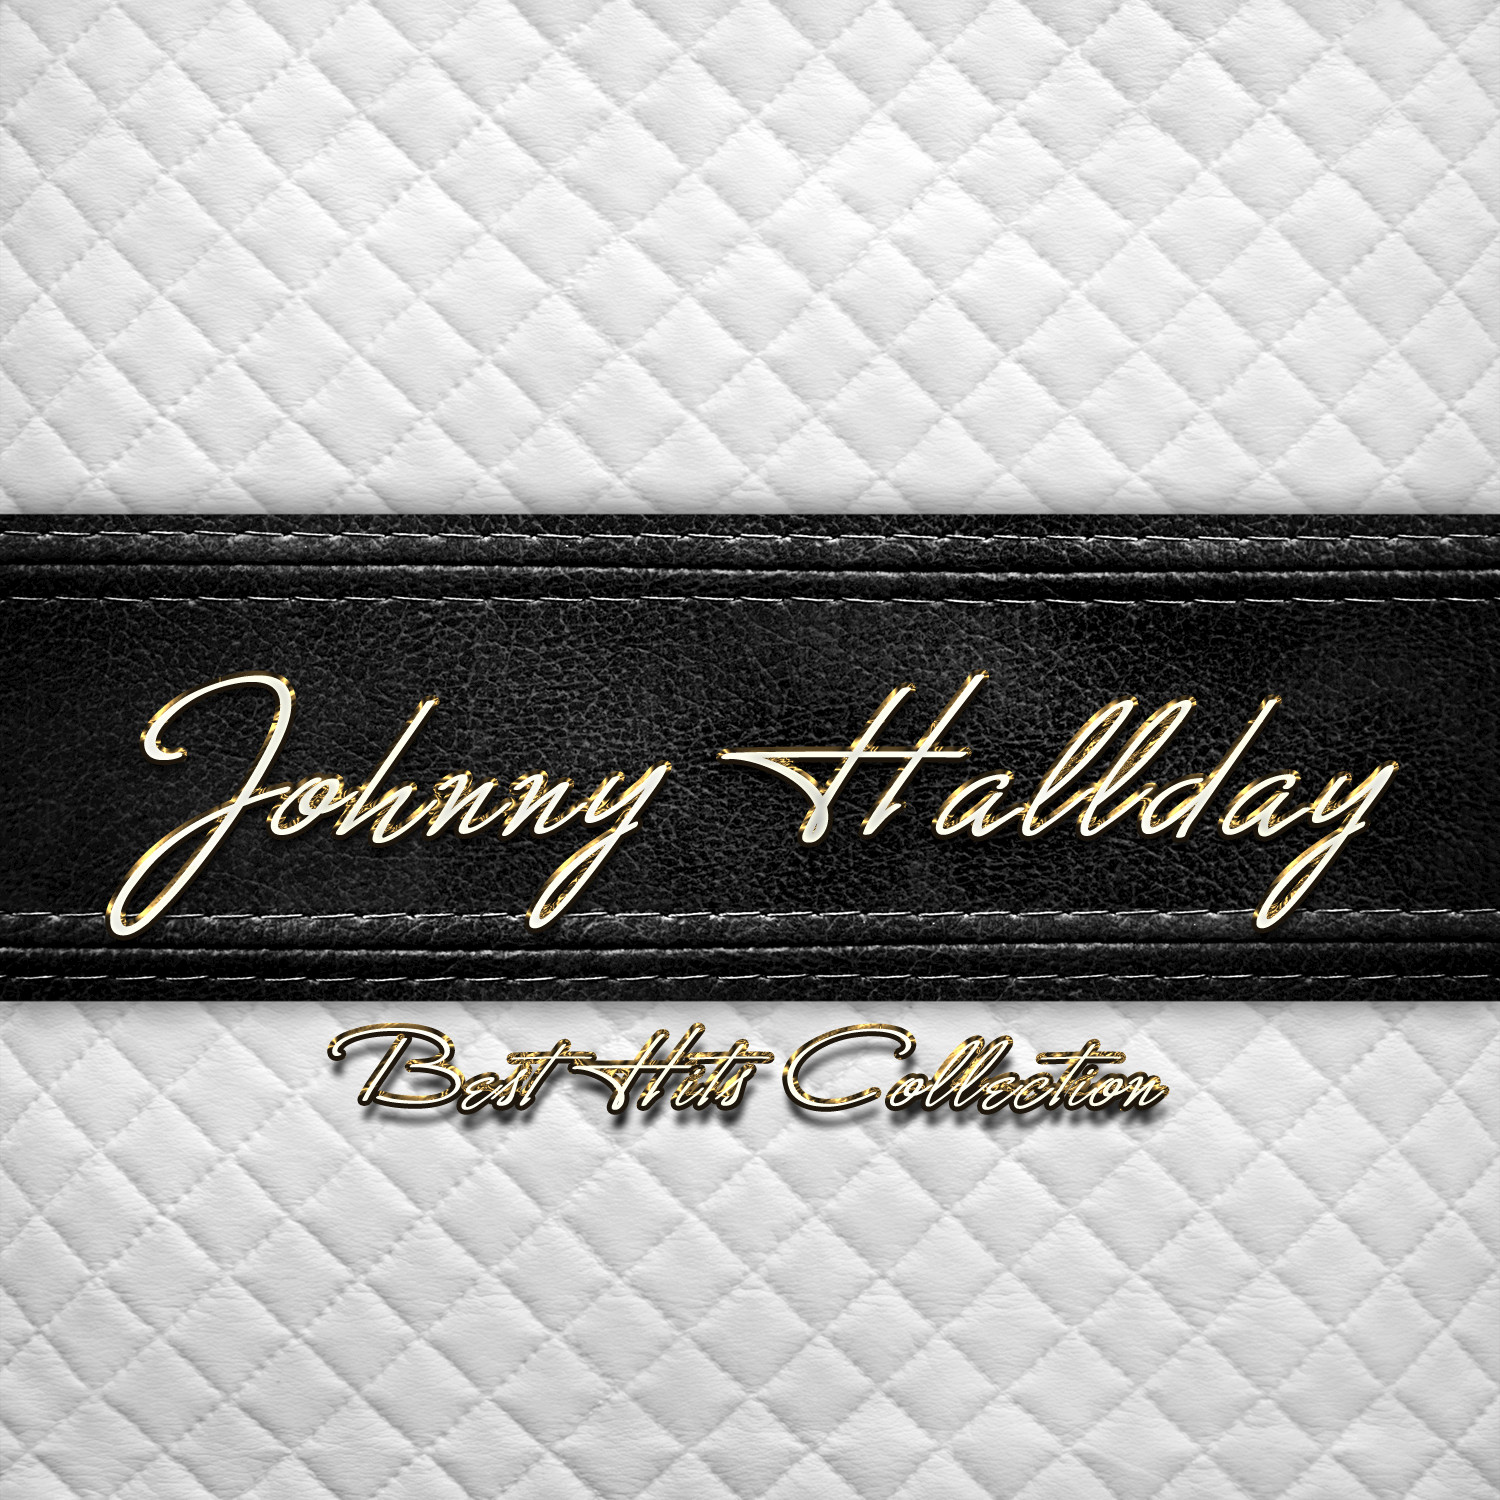 Best Hits Collection of Johnny Hallday